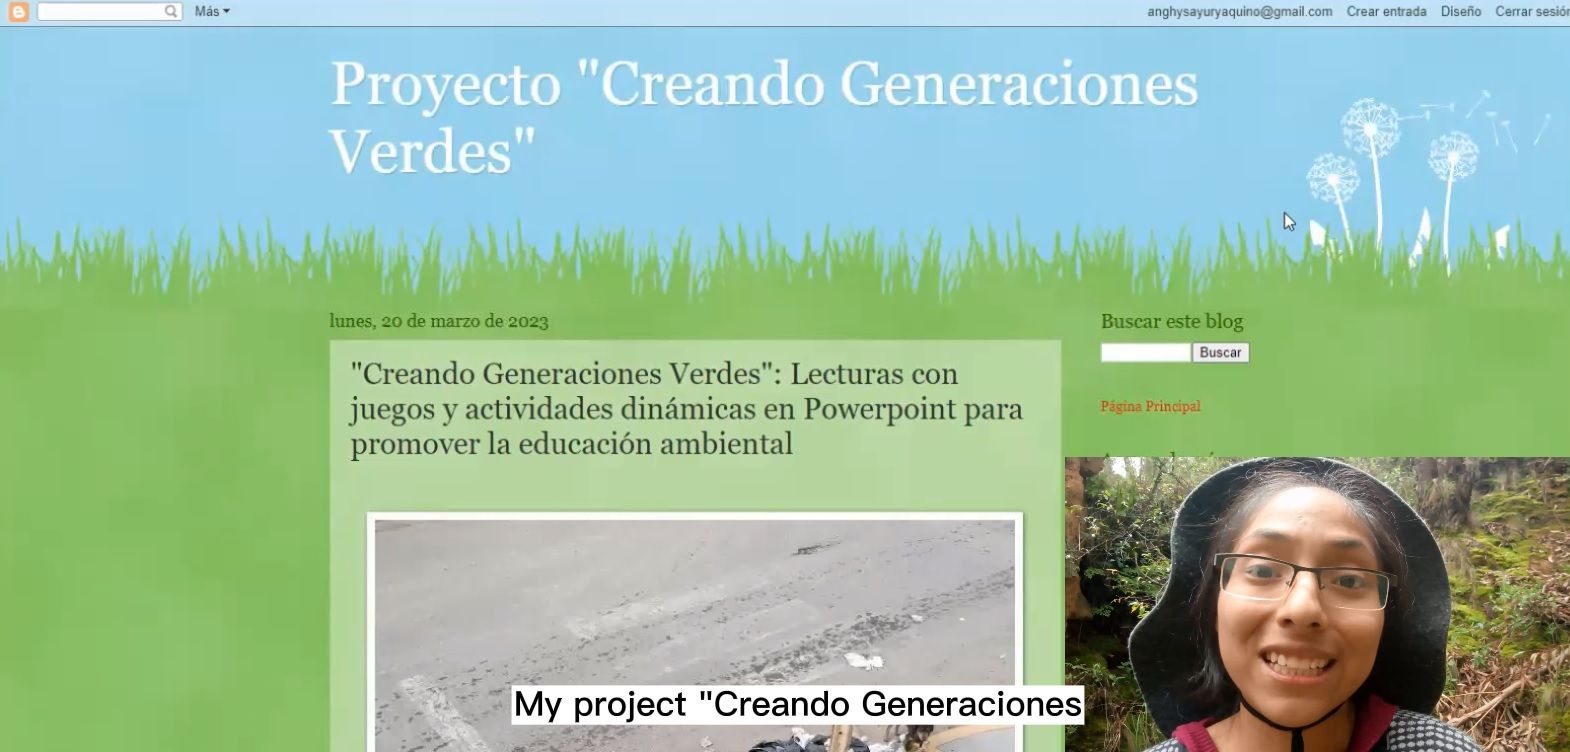 My project "Creando Generaciones Verdes" (Creating Green Generations), educational materials in Spanish that seek to promote environmental education and are aimed at children from 8 to 12 years old.